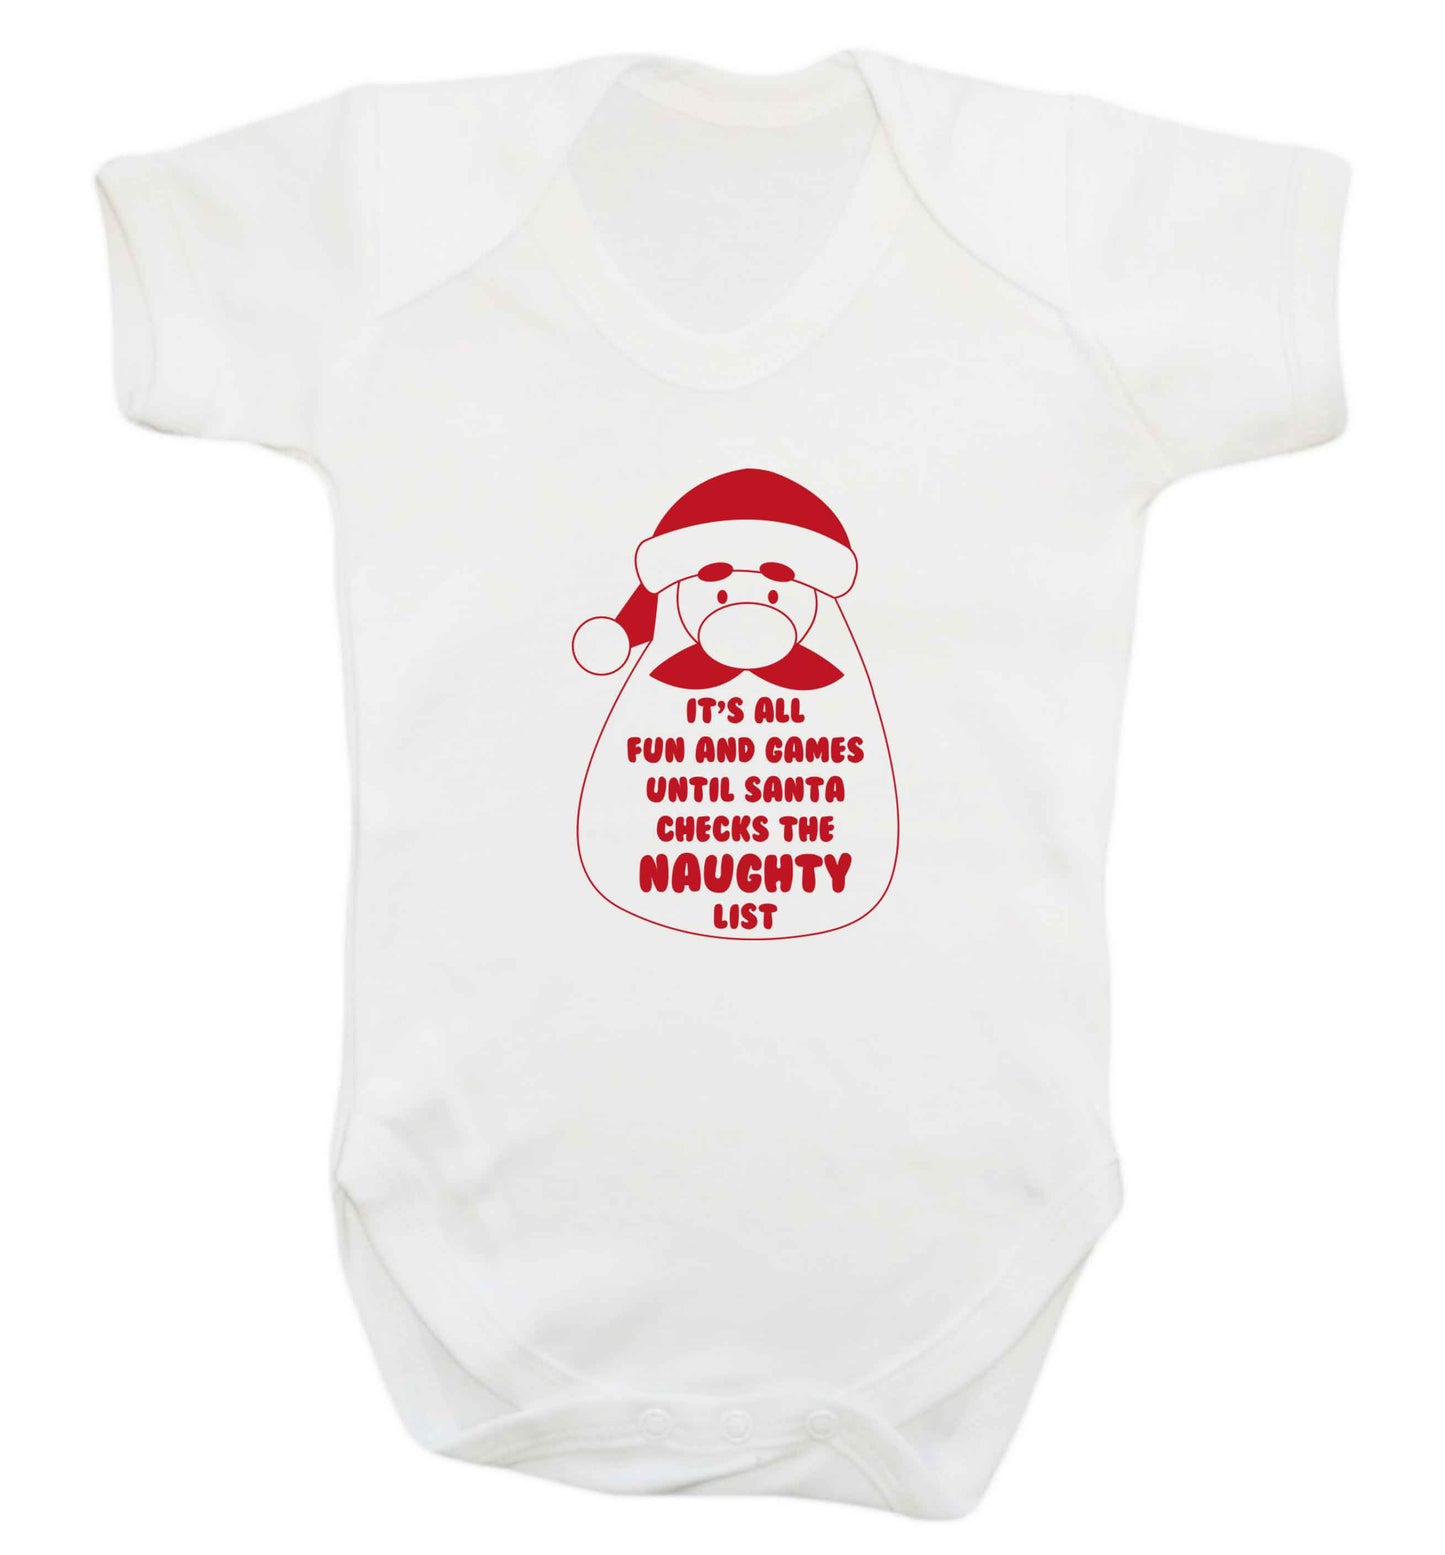 It's all fun and games until Santa checks the naughty list baby vest white 18-24 months